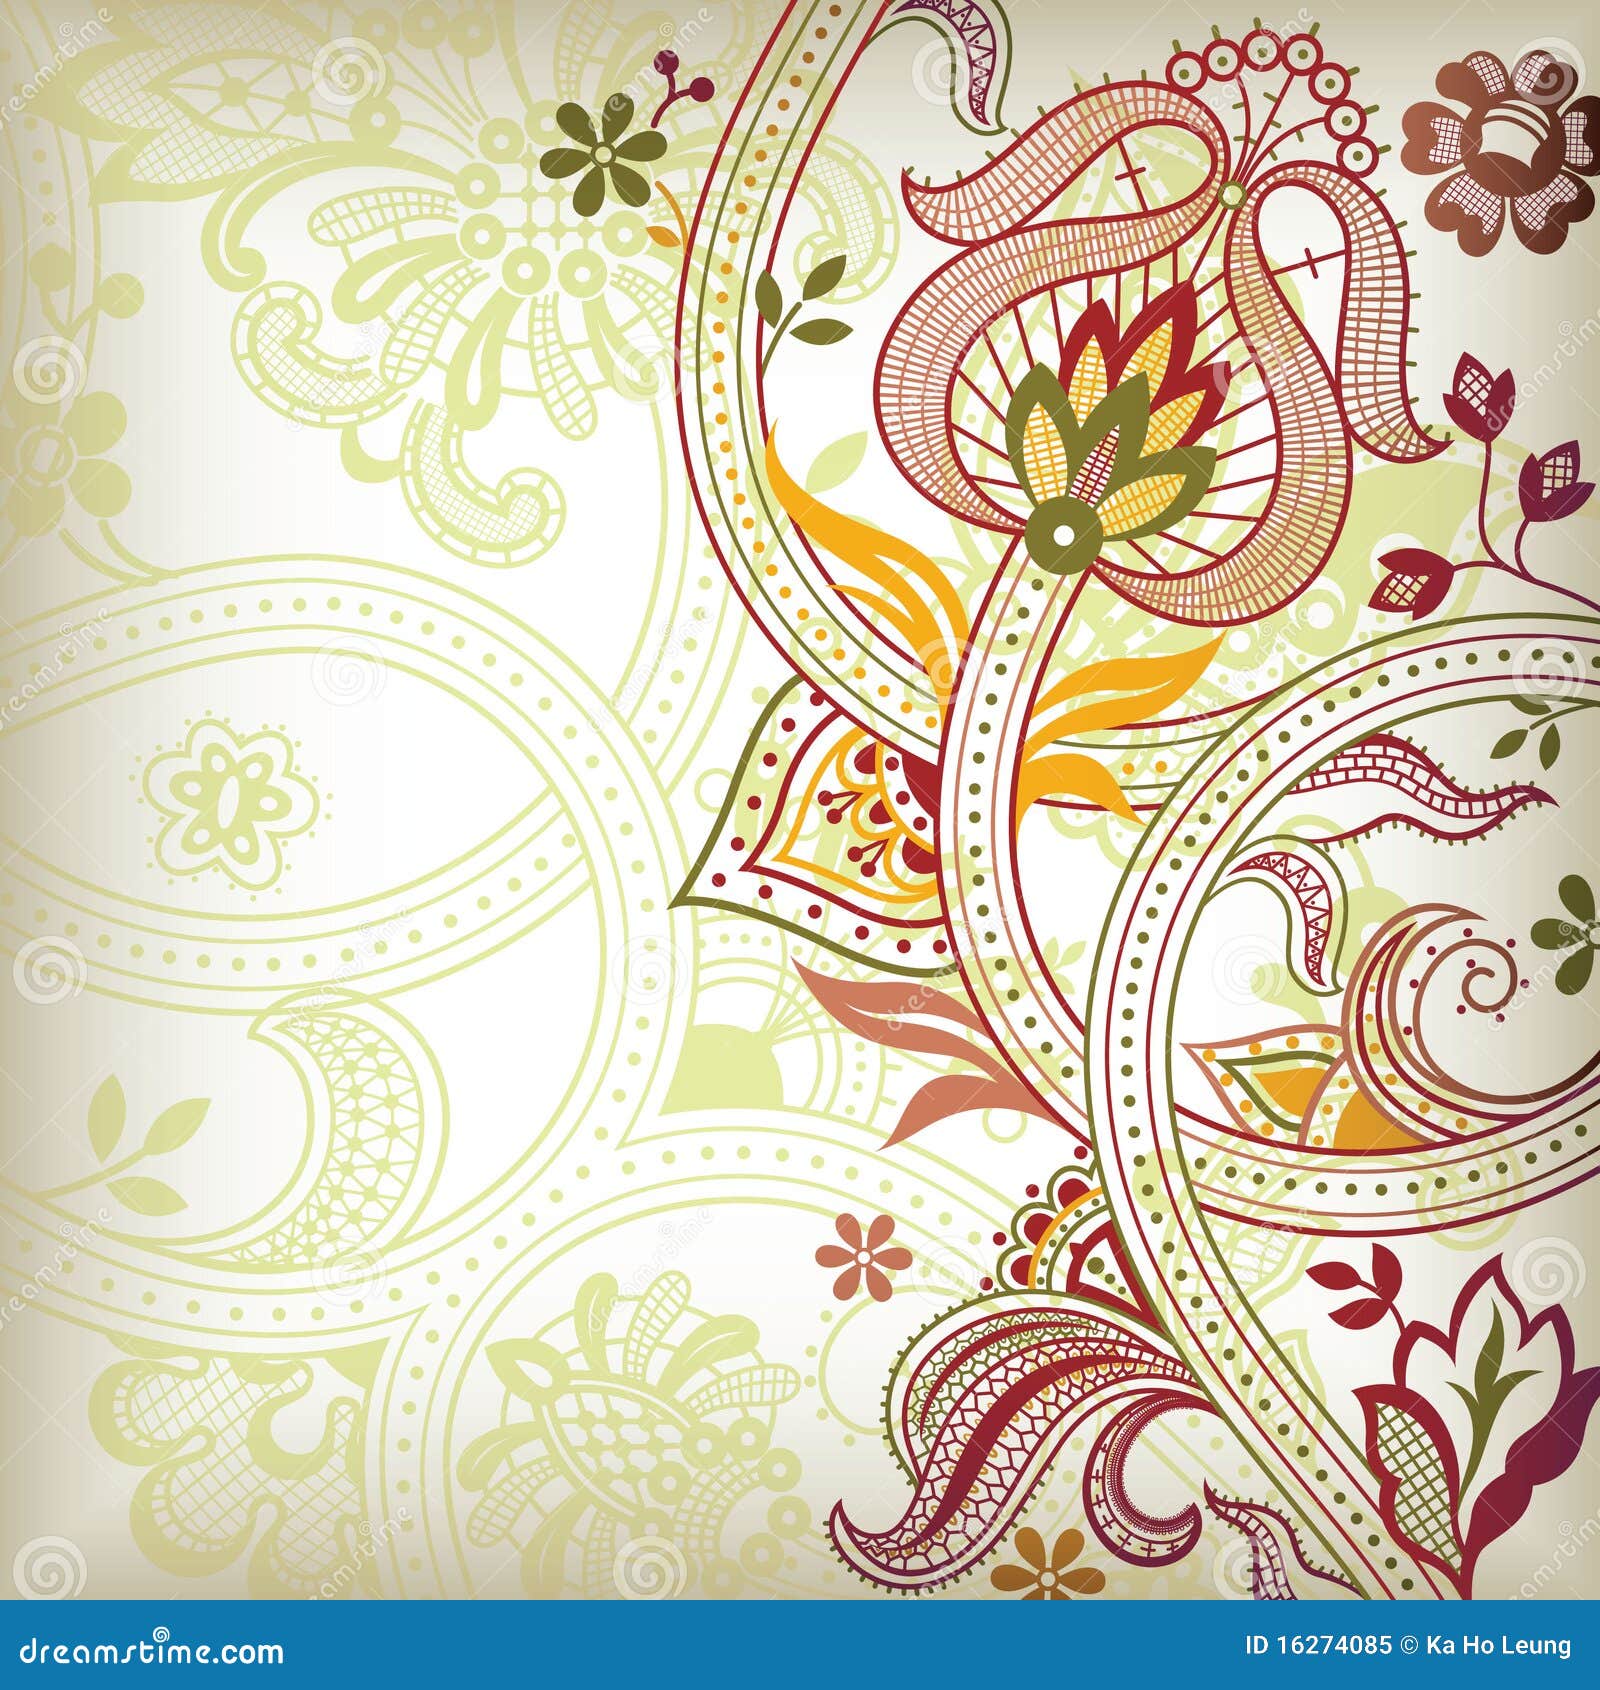 Abstract Floral Scroll stock vector. Illustration of scroll - 16274085